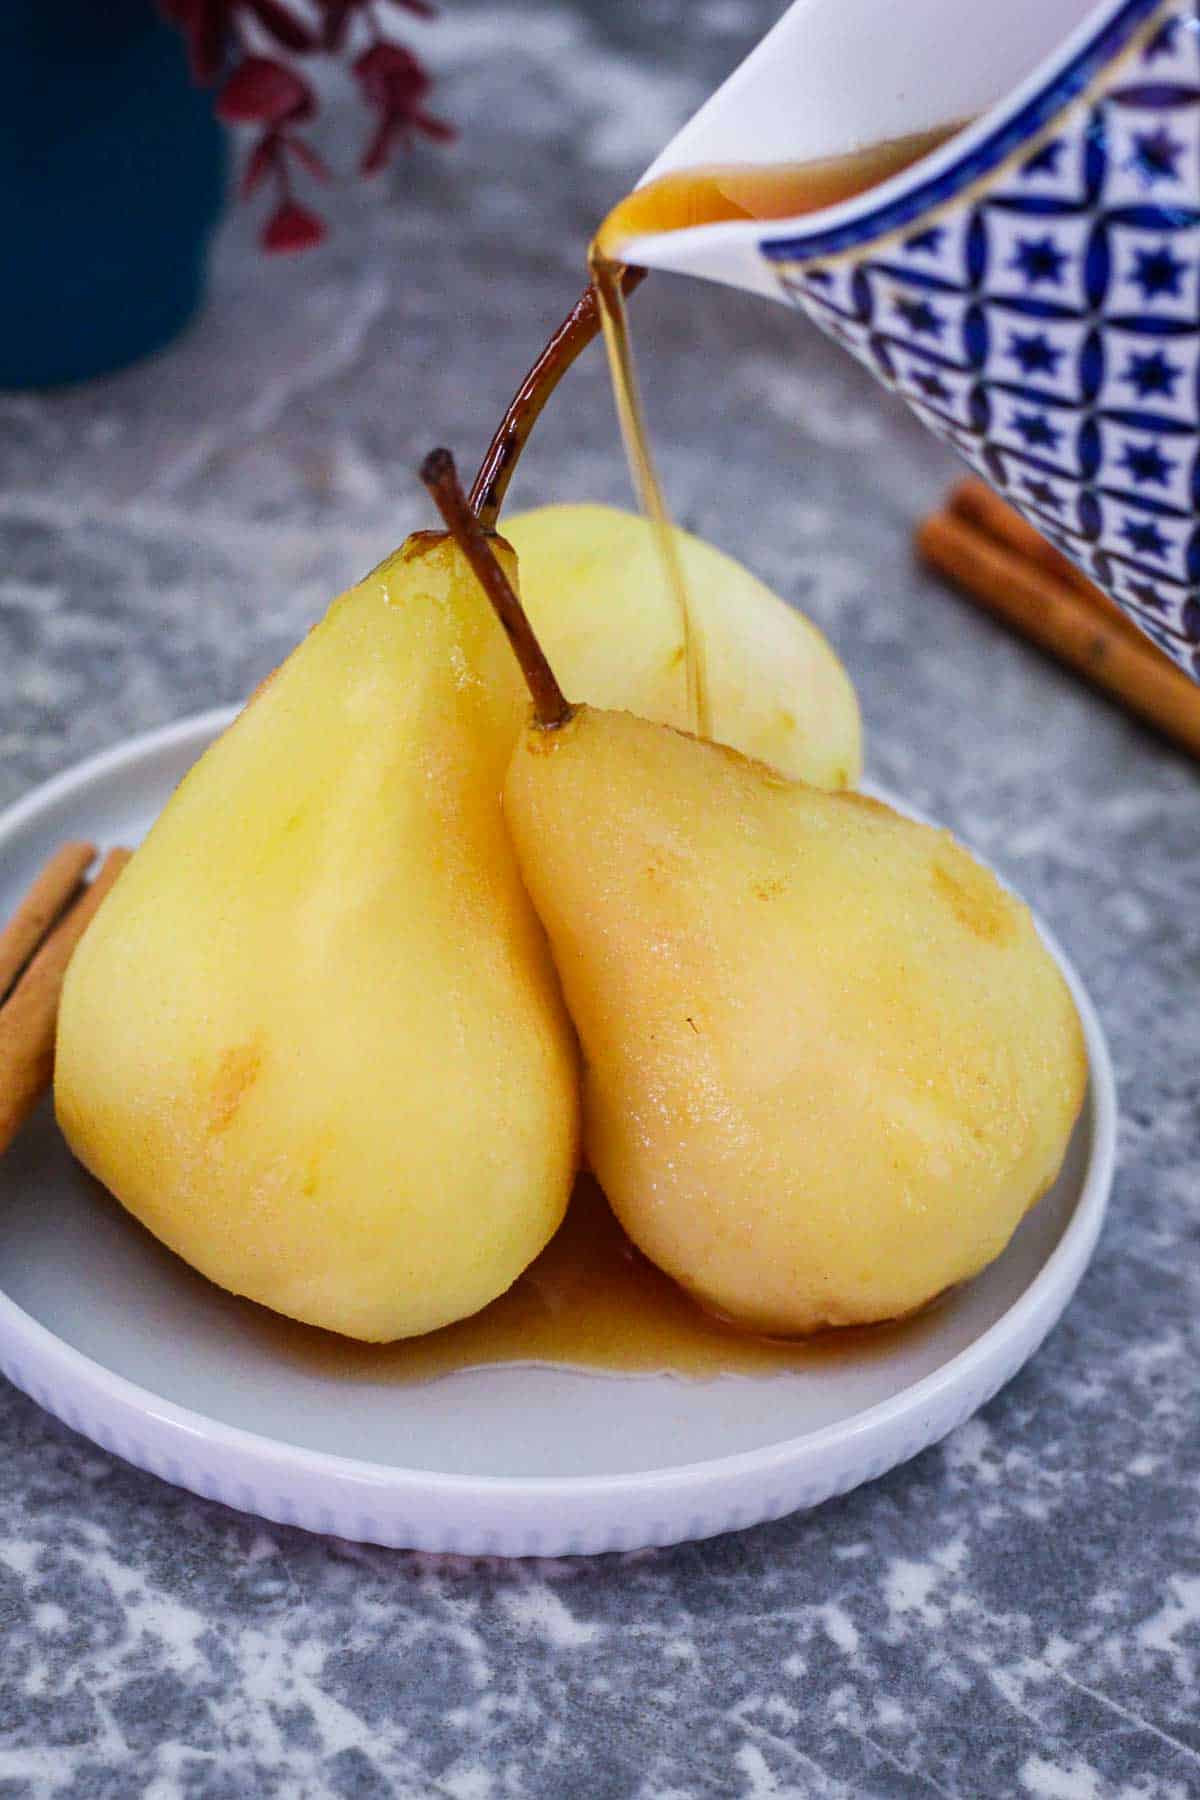 Pouring thickened syrup over the poached pears.